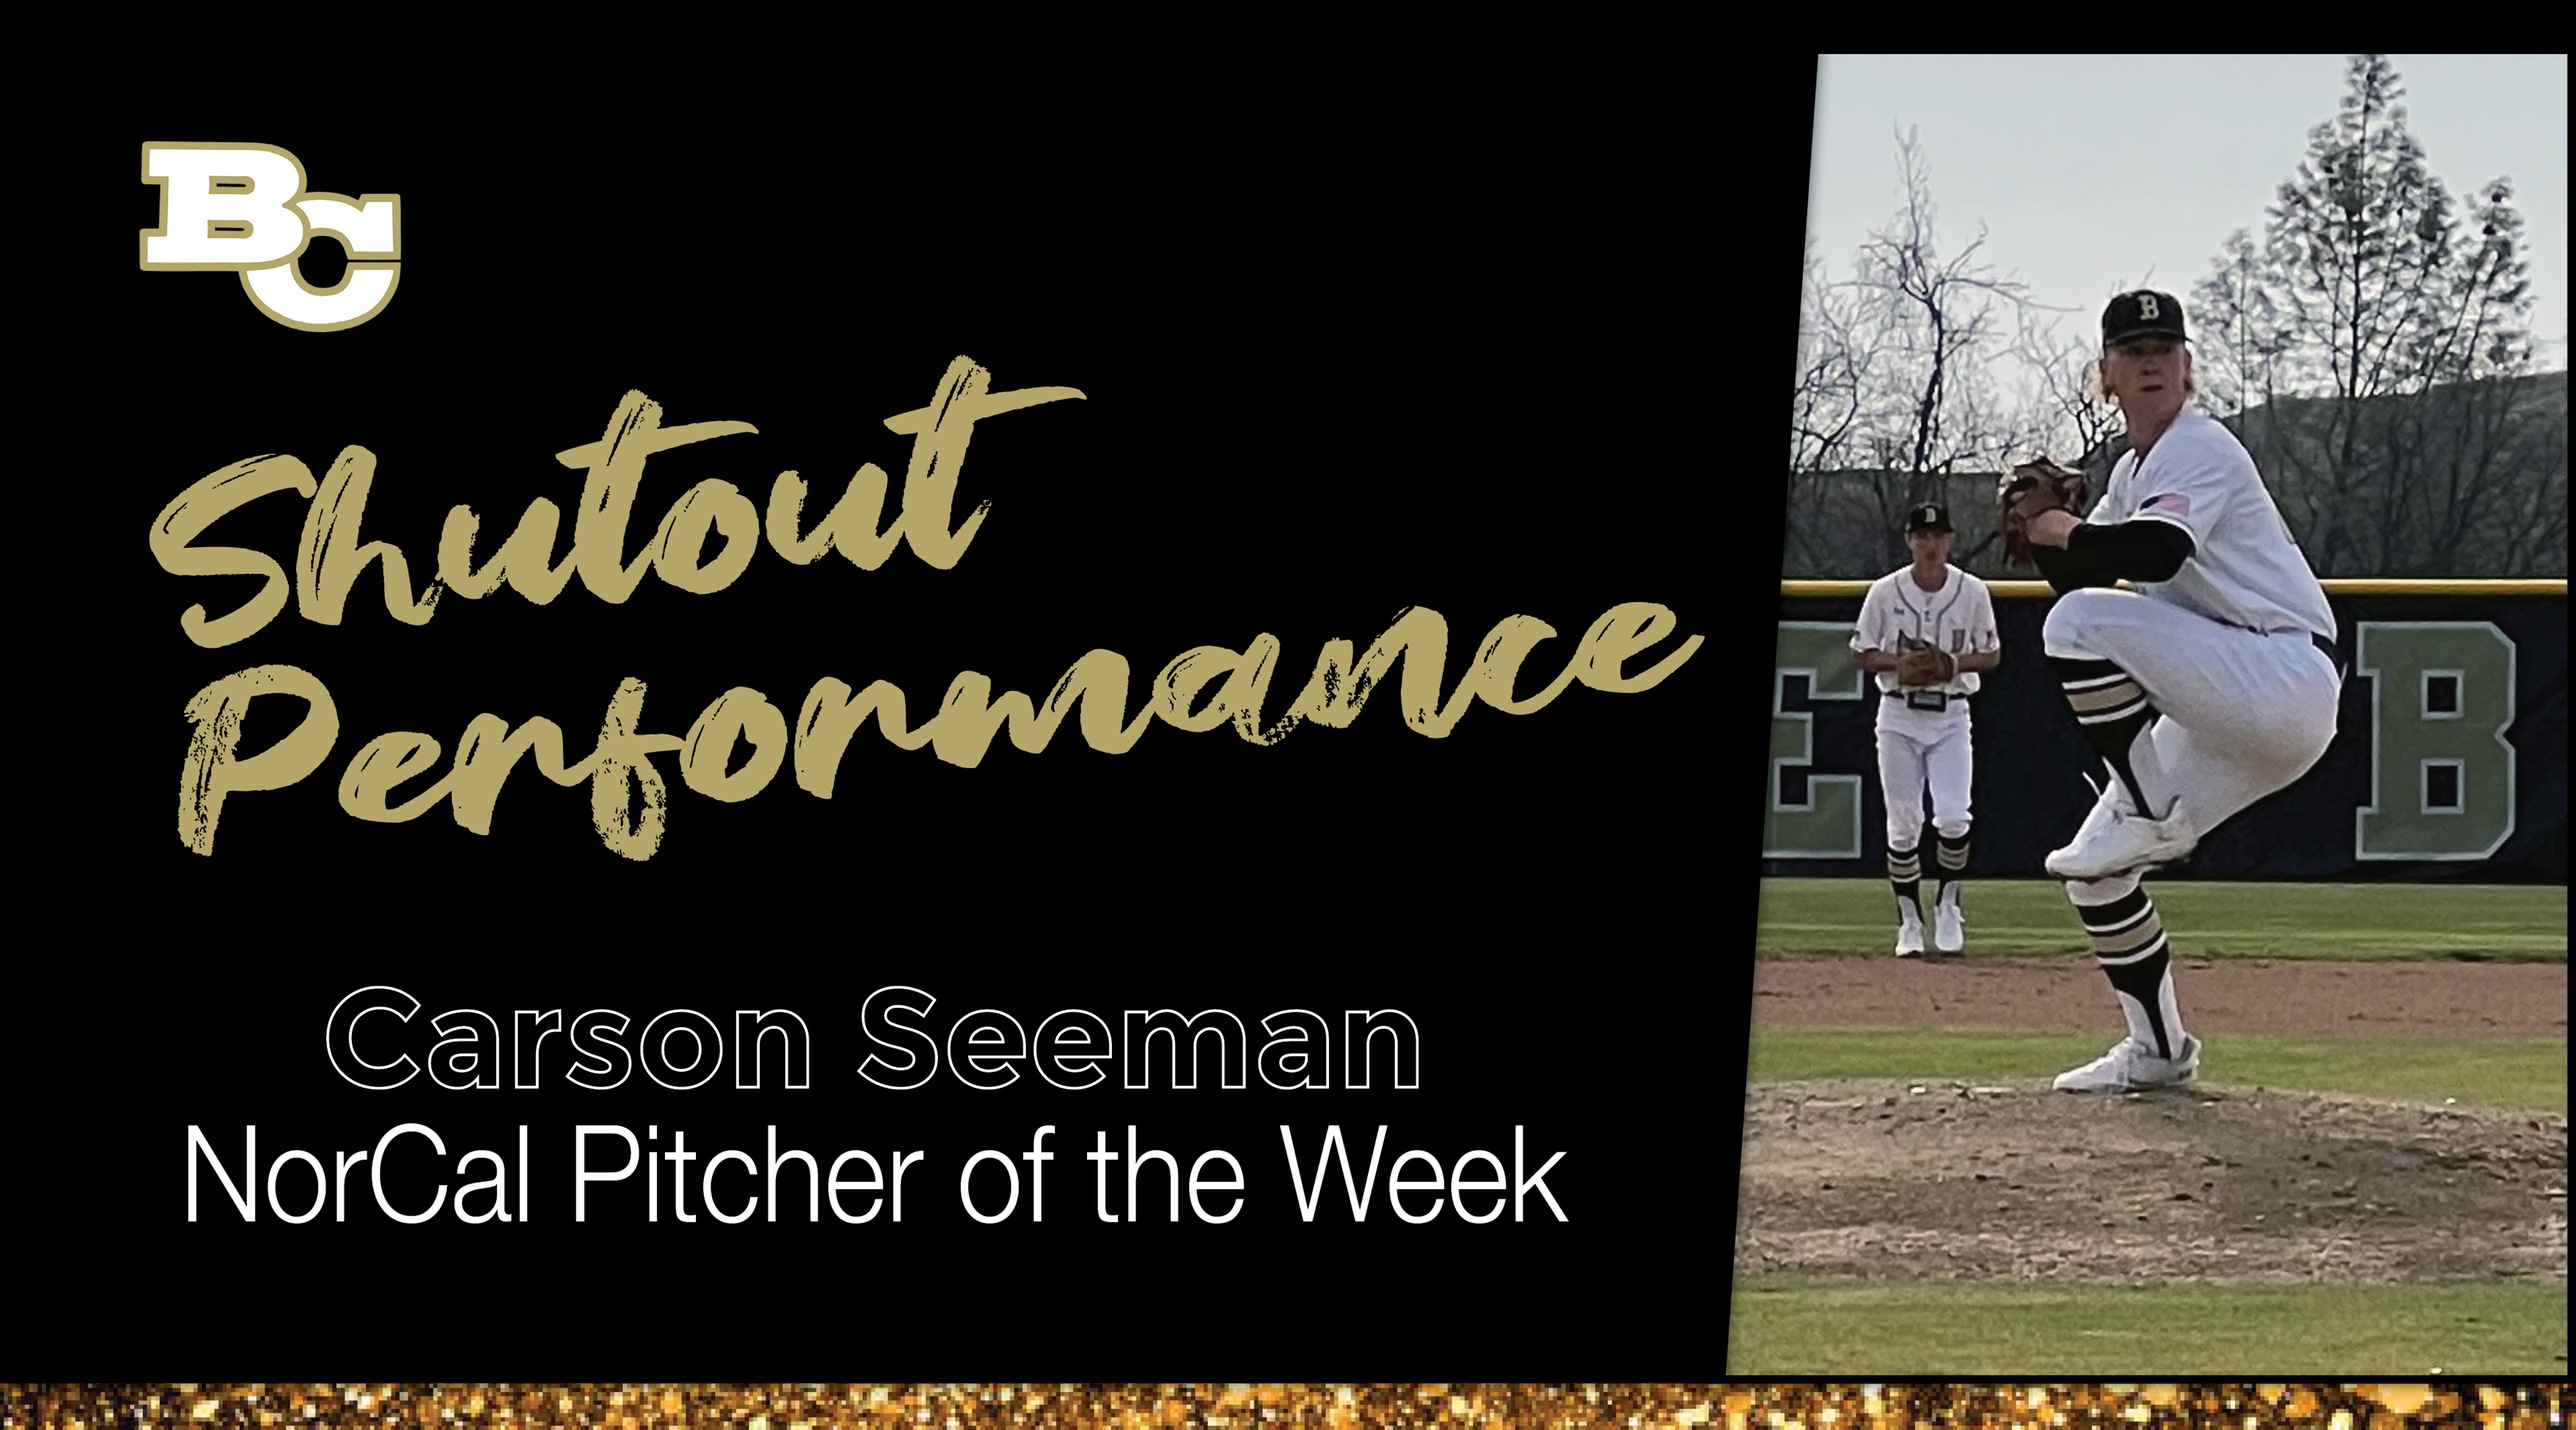 Seeman's Shutout Performance Earns Pitcher of the Week Honors